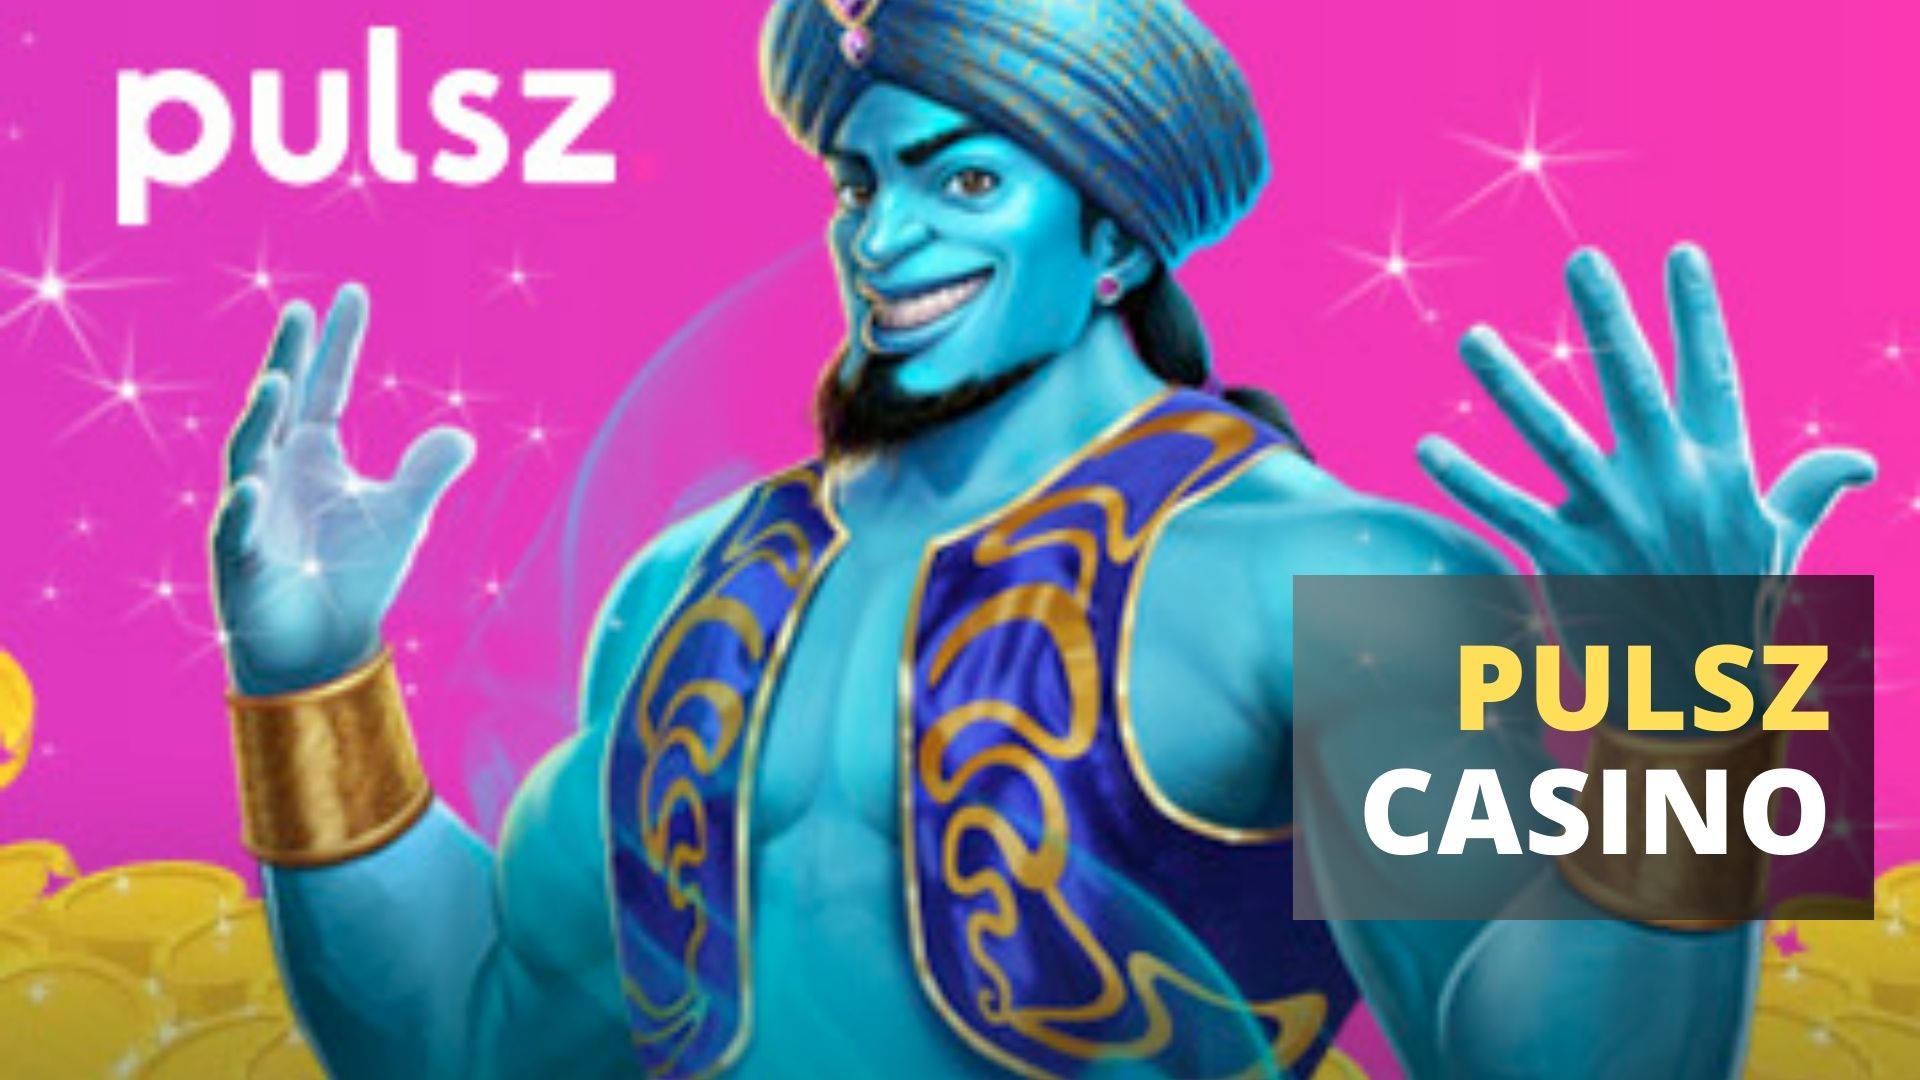 About Pulsz Casino